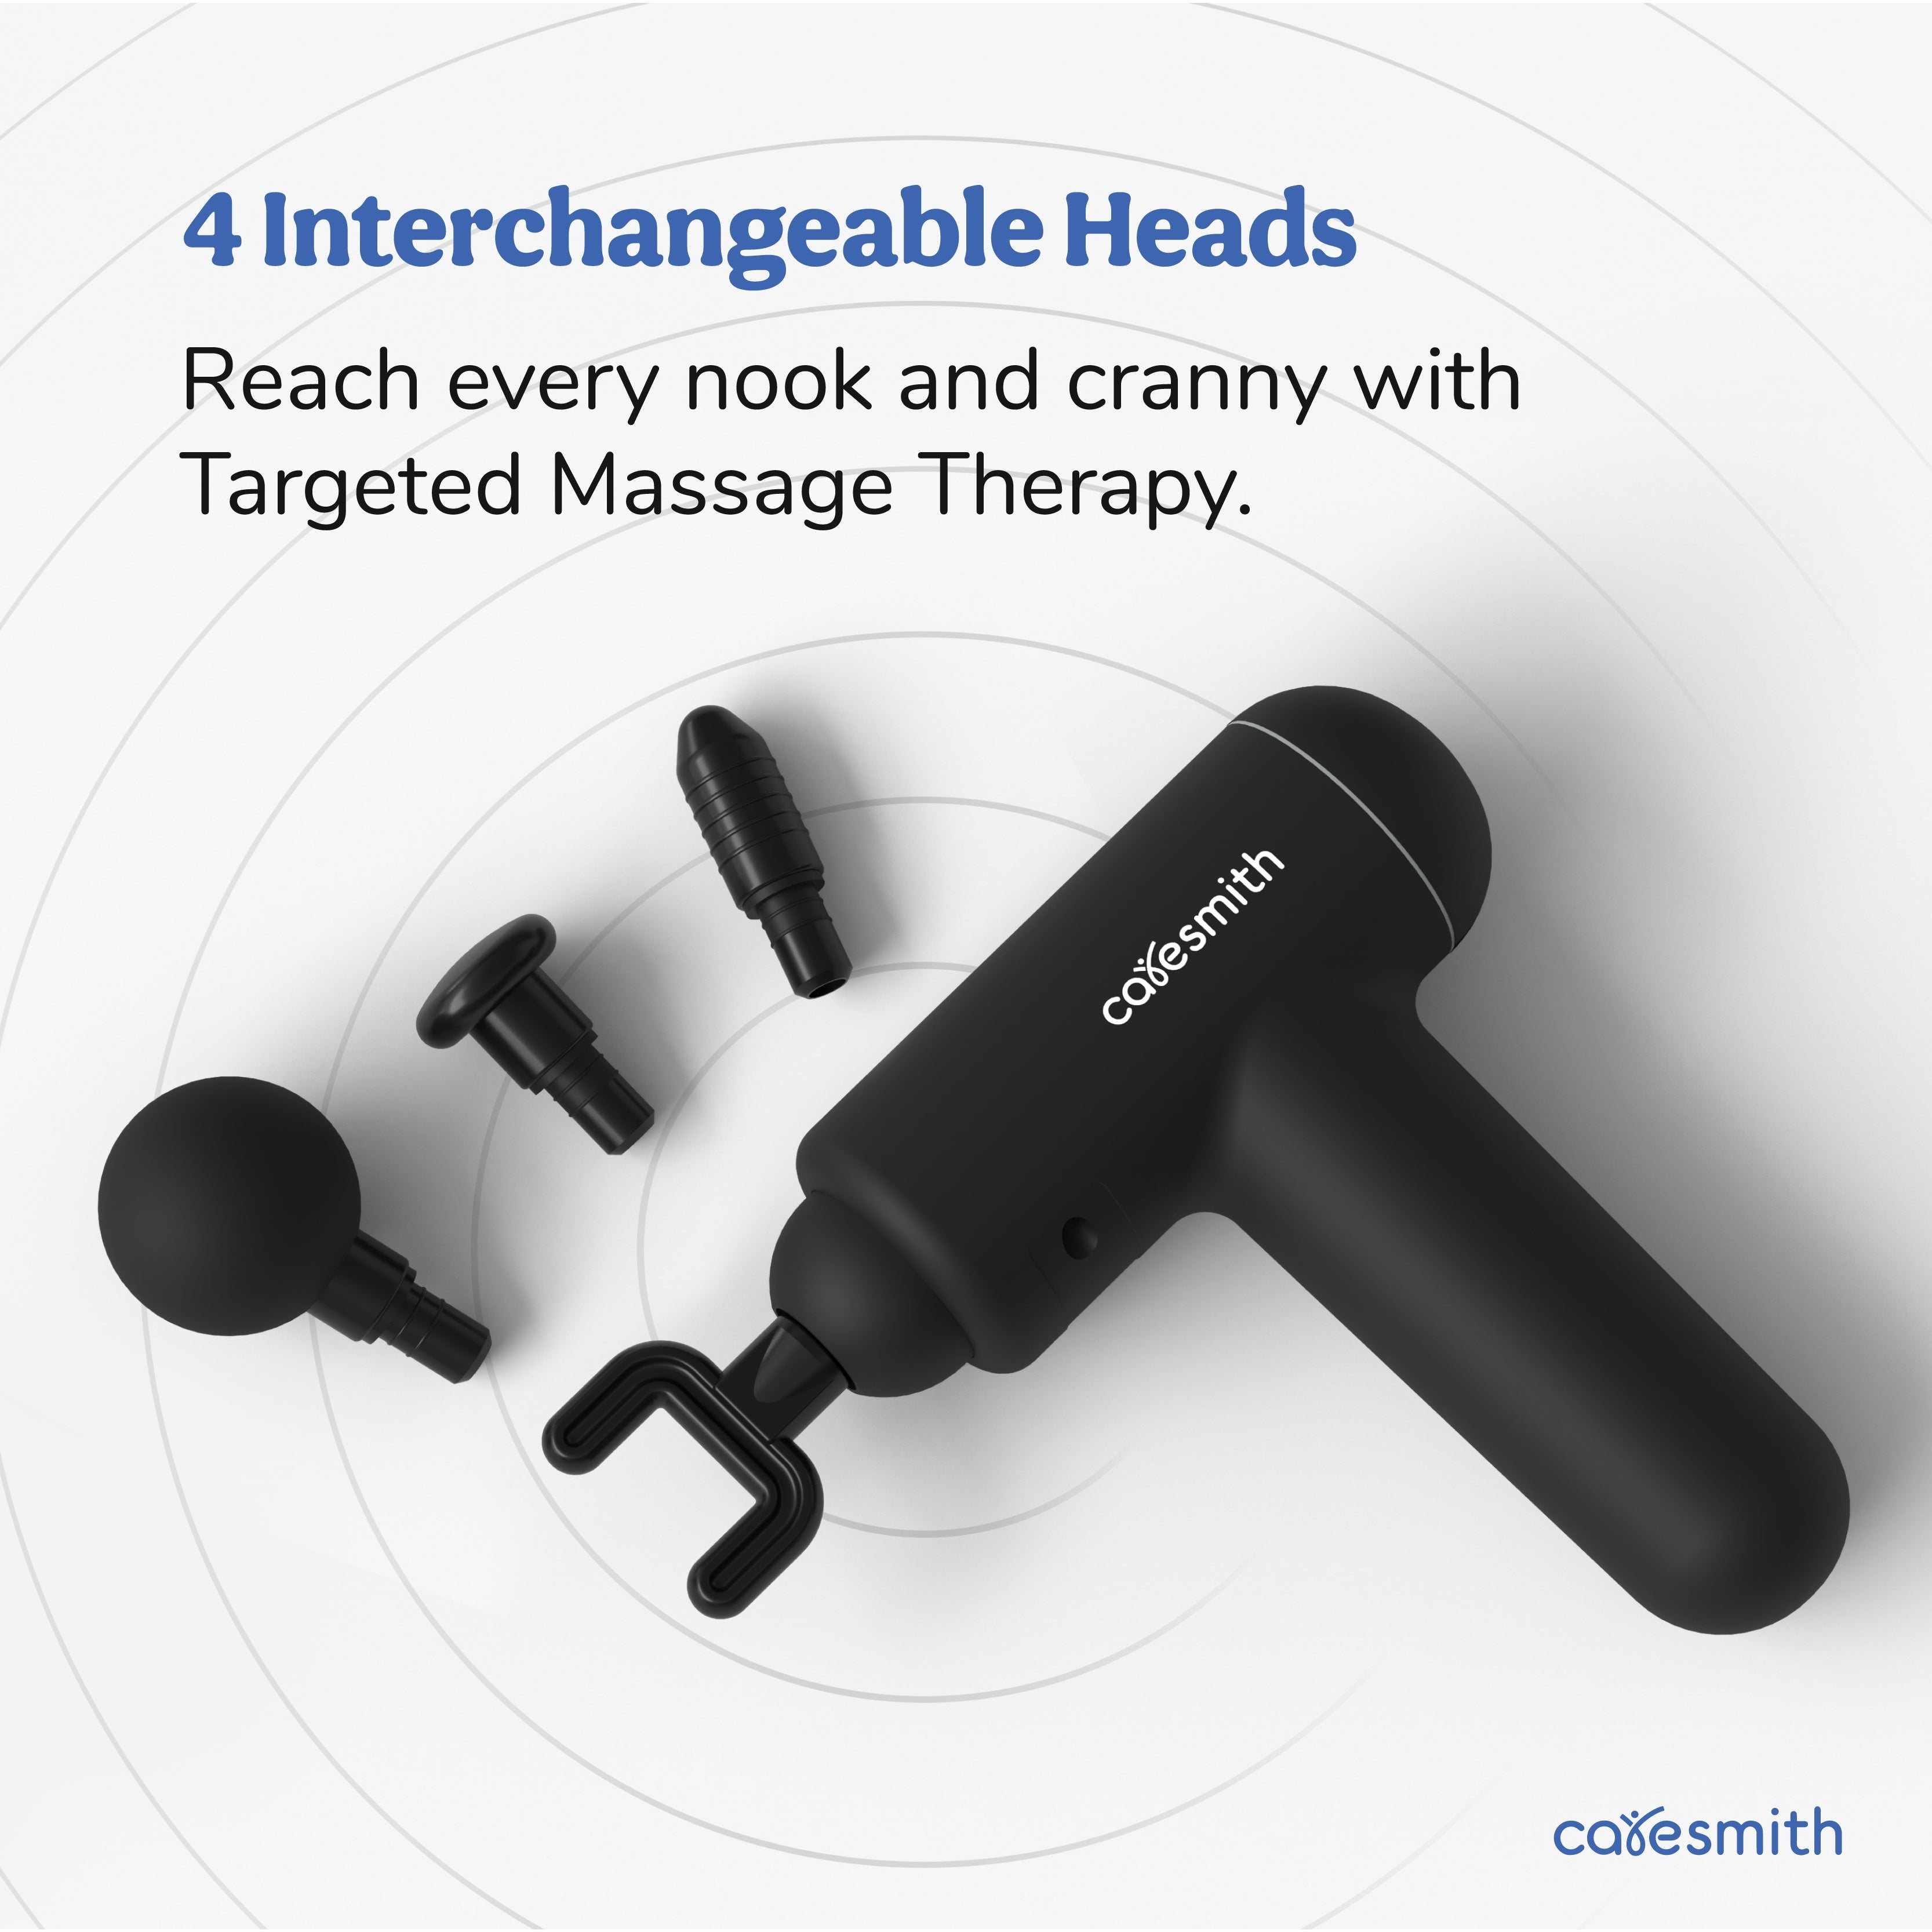 Caresmith Charge Boost Massage Gun with Interchangeable Heads